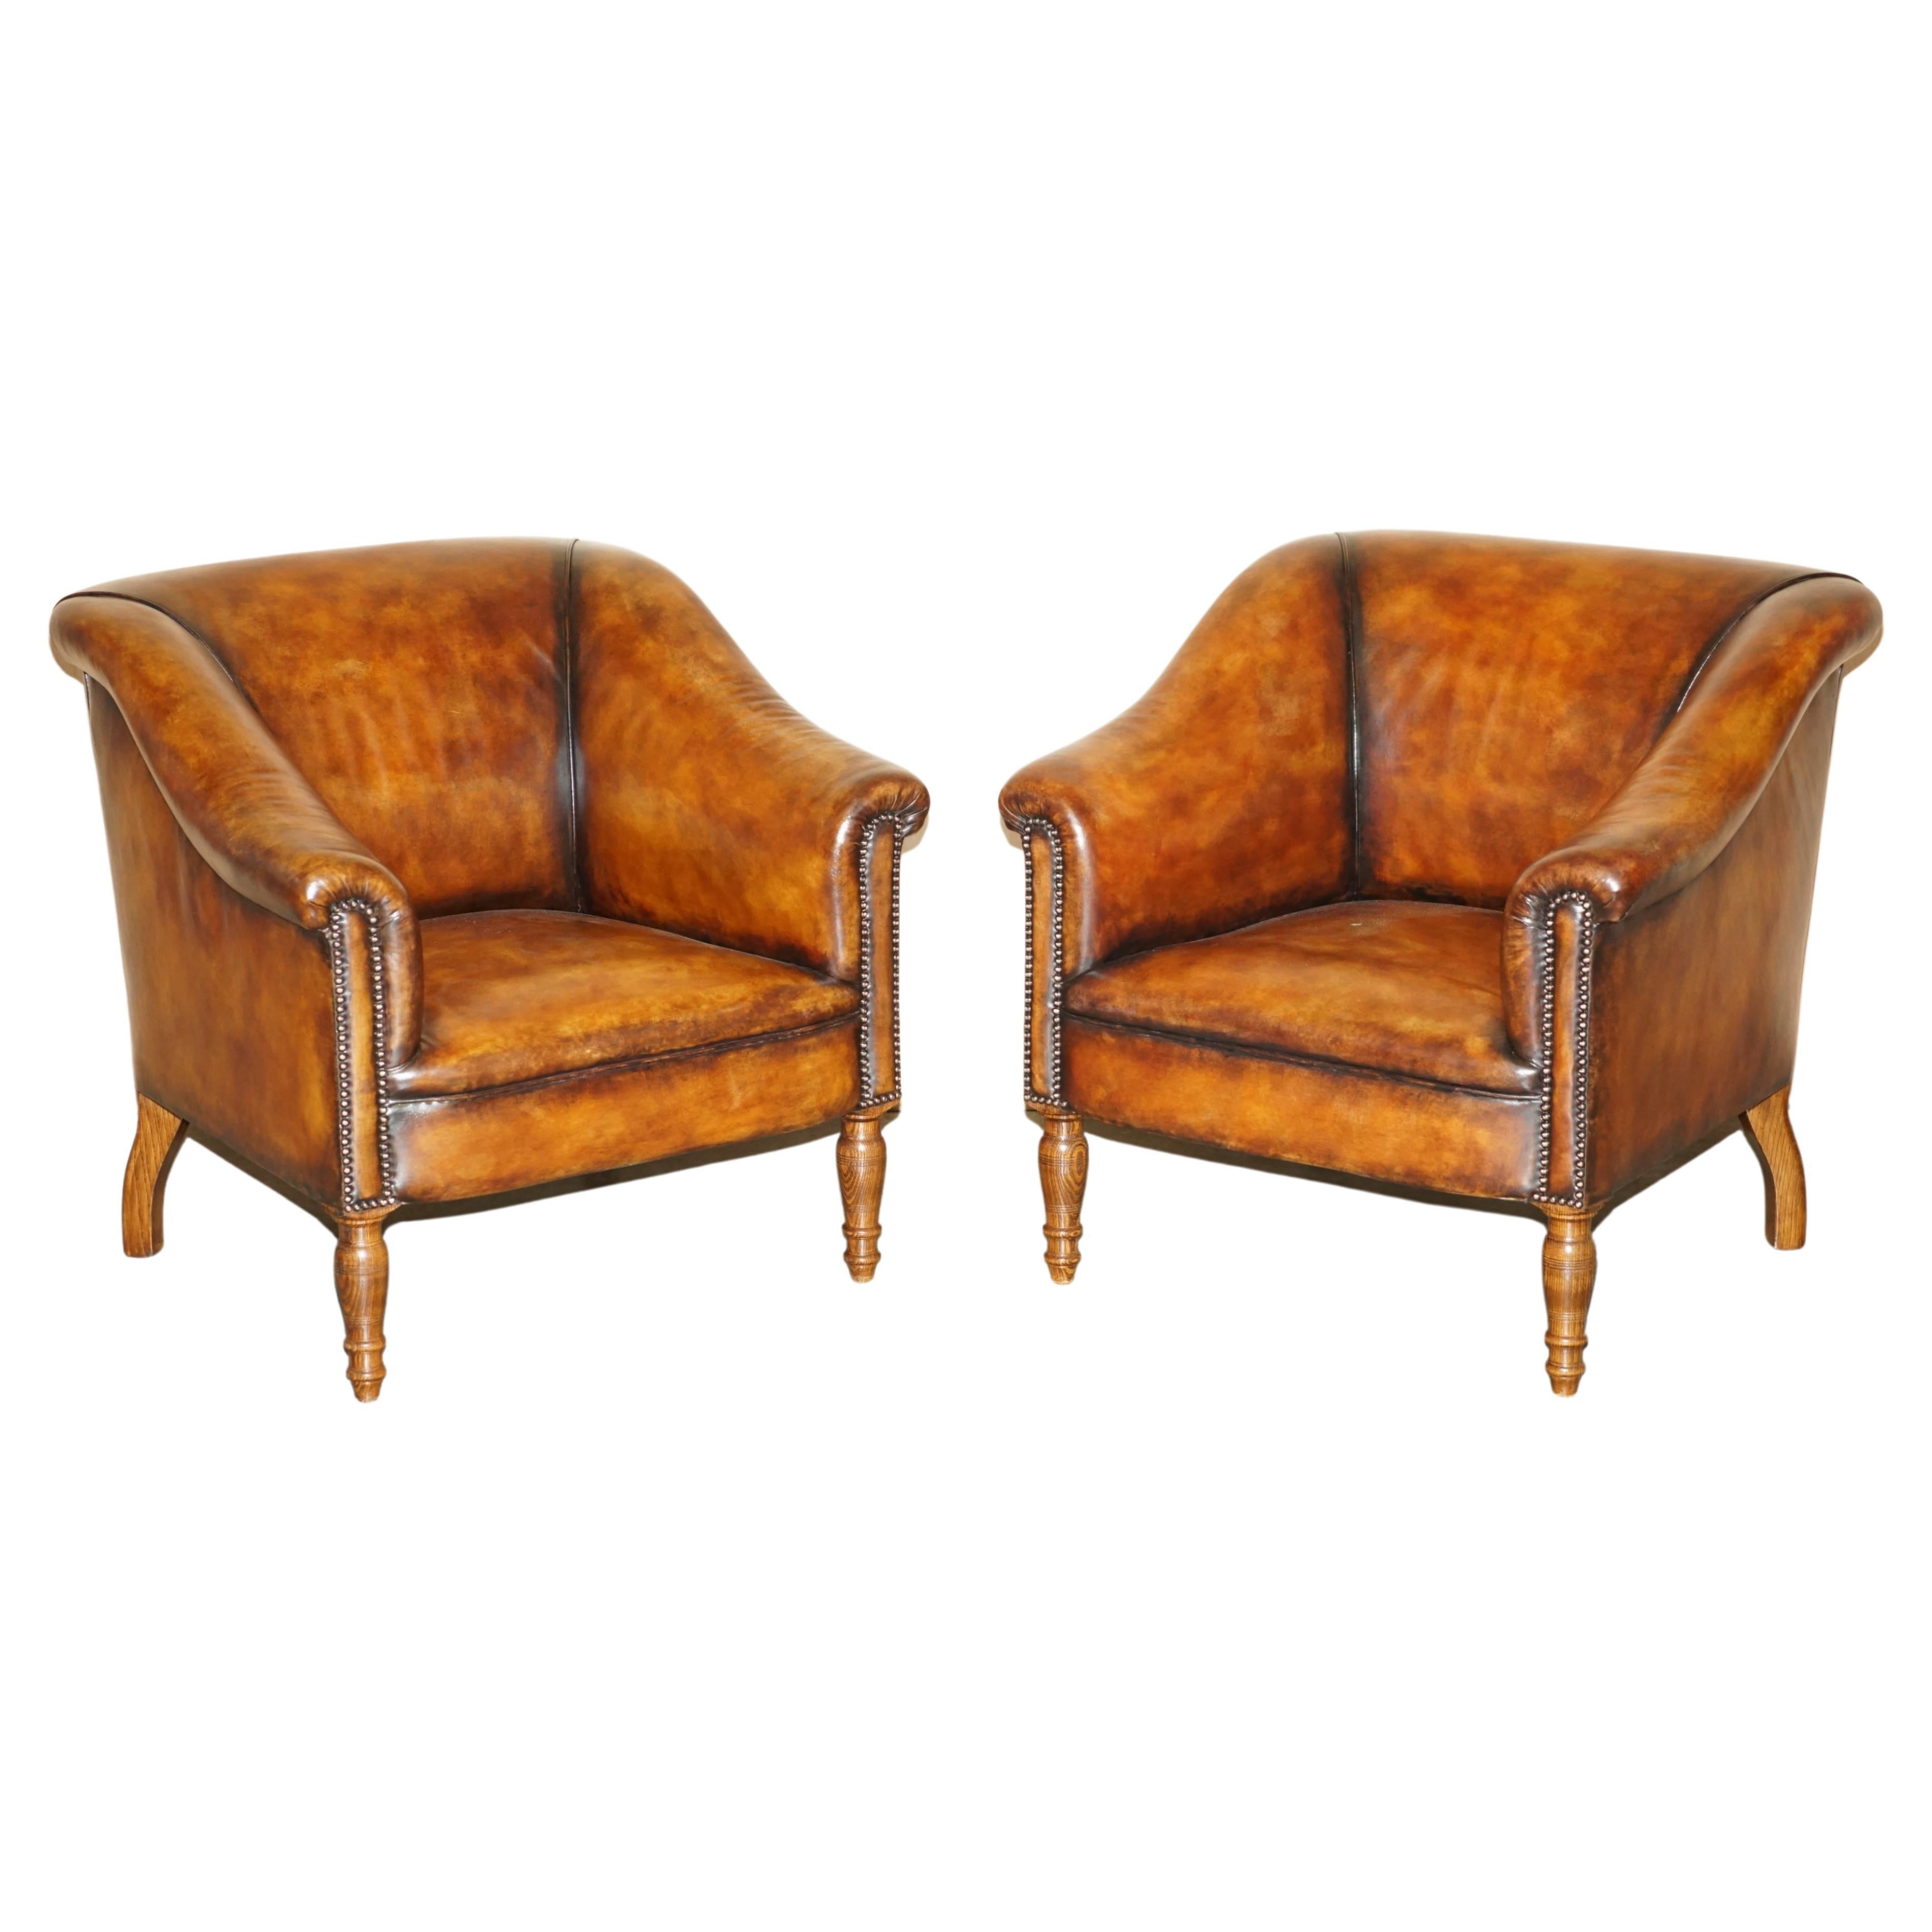 PAIR OF GEORGE SMITH SOMERVILLE RESTORED BROWN LEATHER ARMCHAiRS